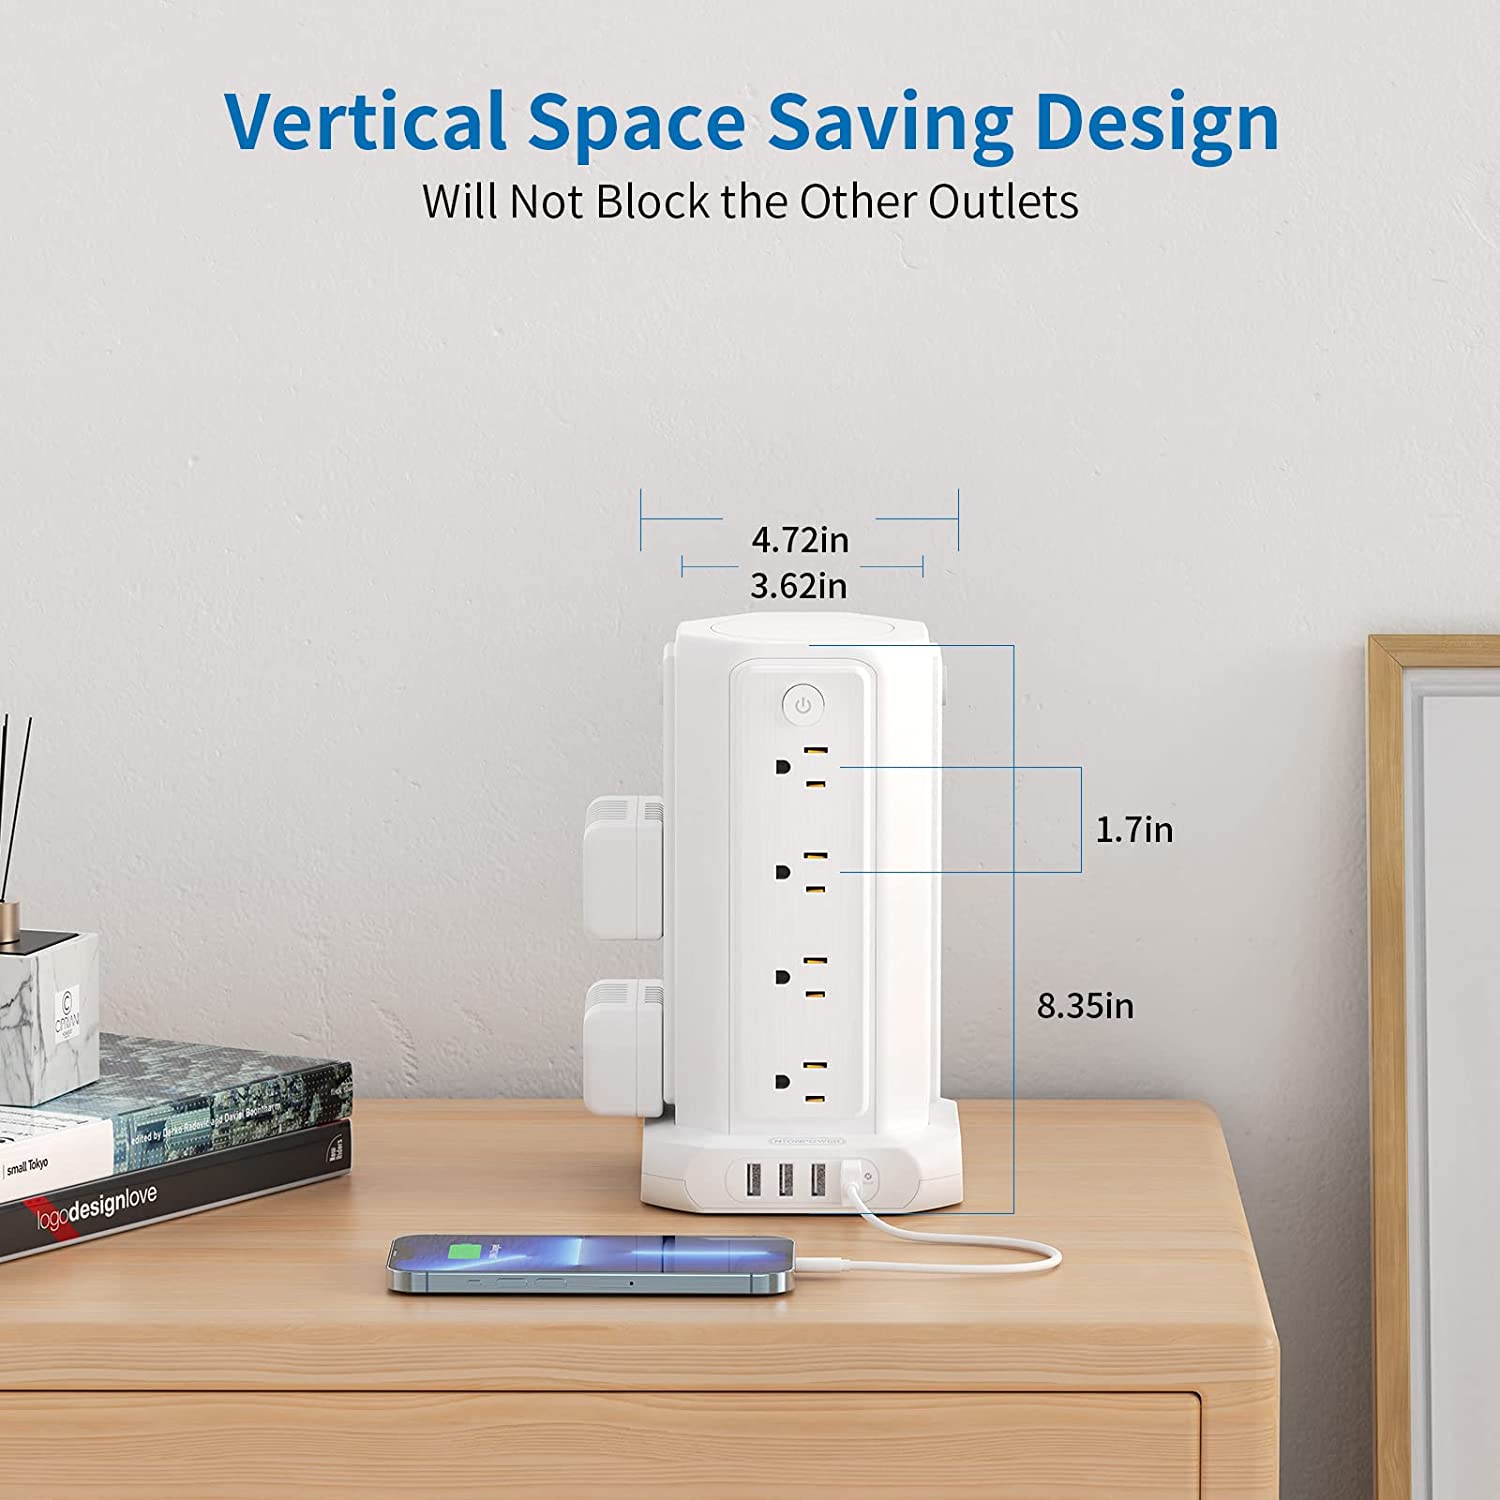 Ntonpower Surge  Protection Tower 16 Outlets 4 USB 1080J Power Strip Tower